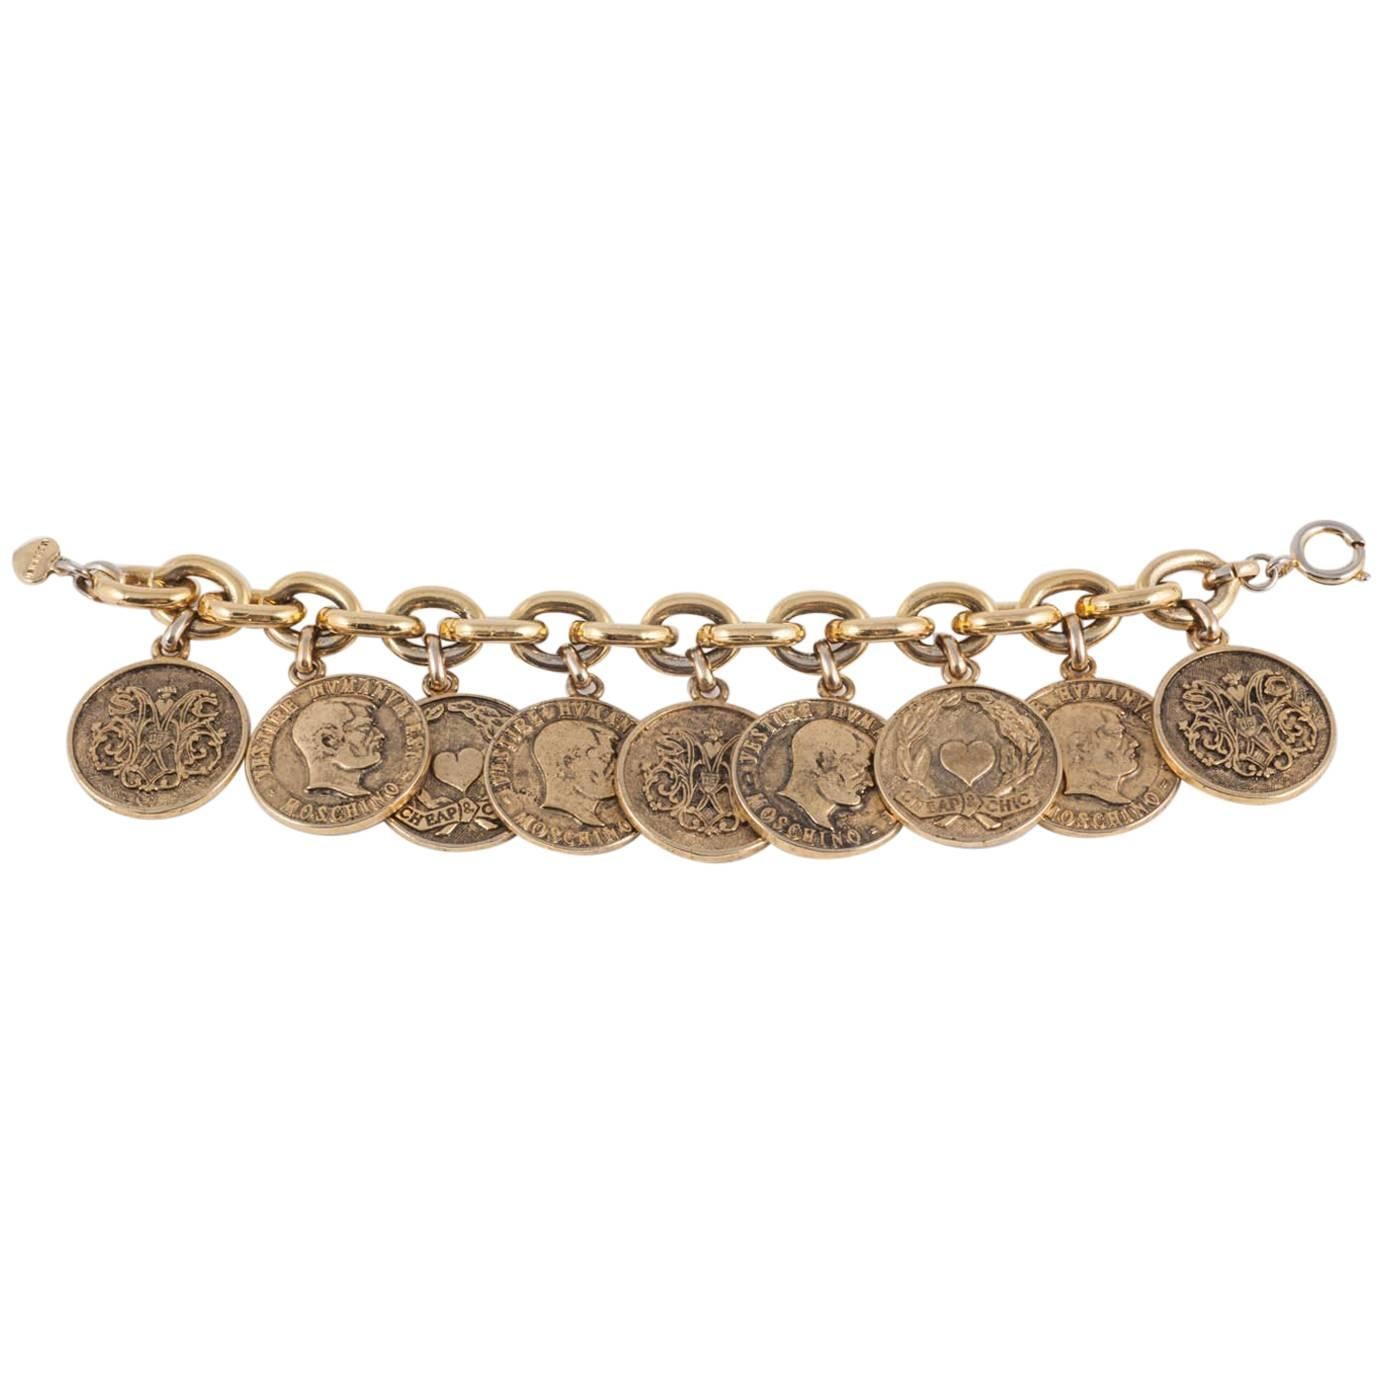  Early 'Cheap and Chic' antiqued gilt coins charm bracelet, Moschino, 1990s 